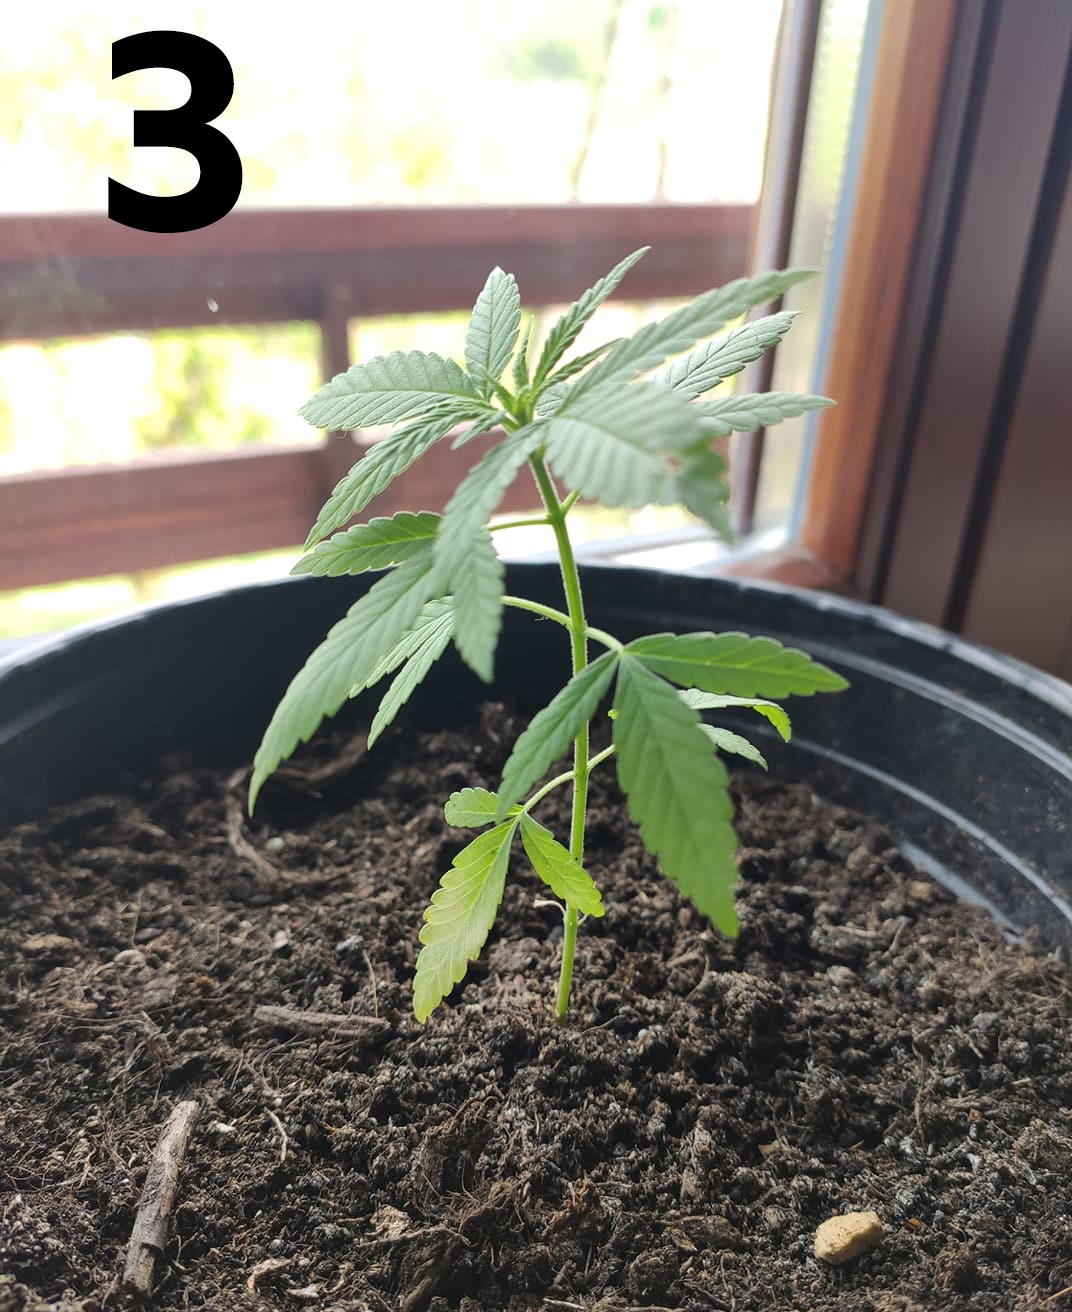 Plants stopped growing problem 3